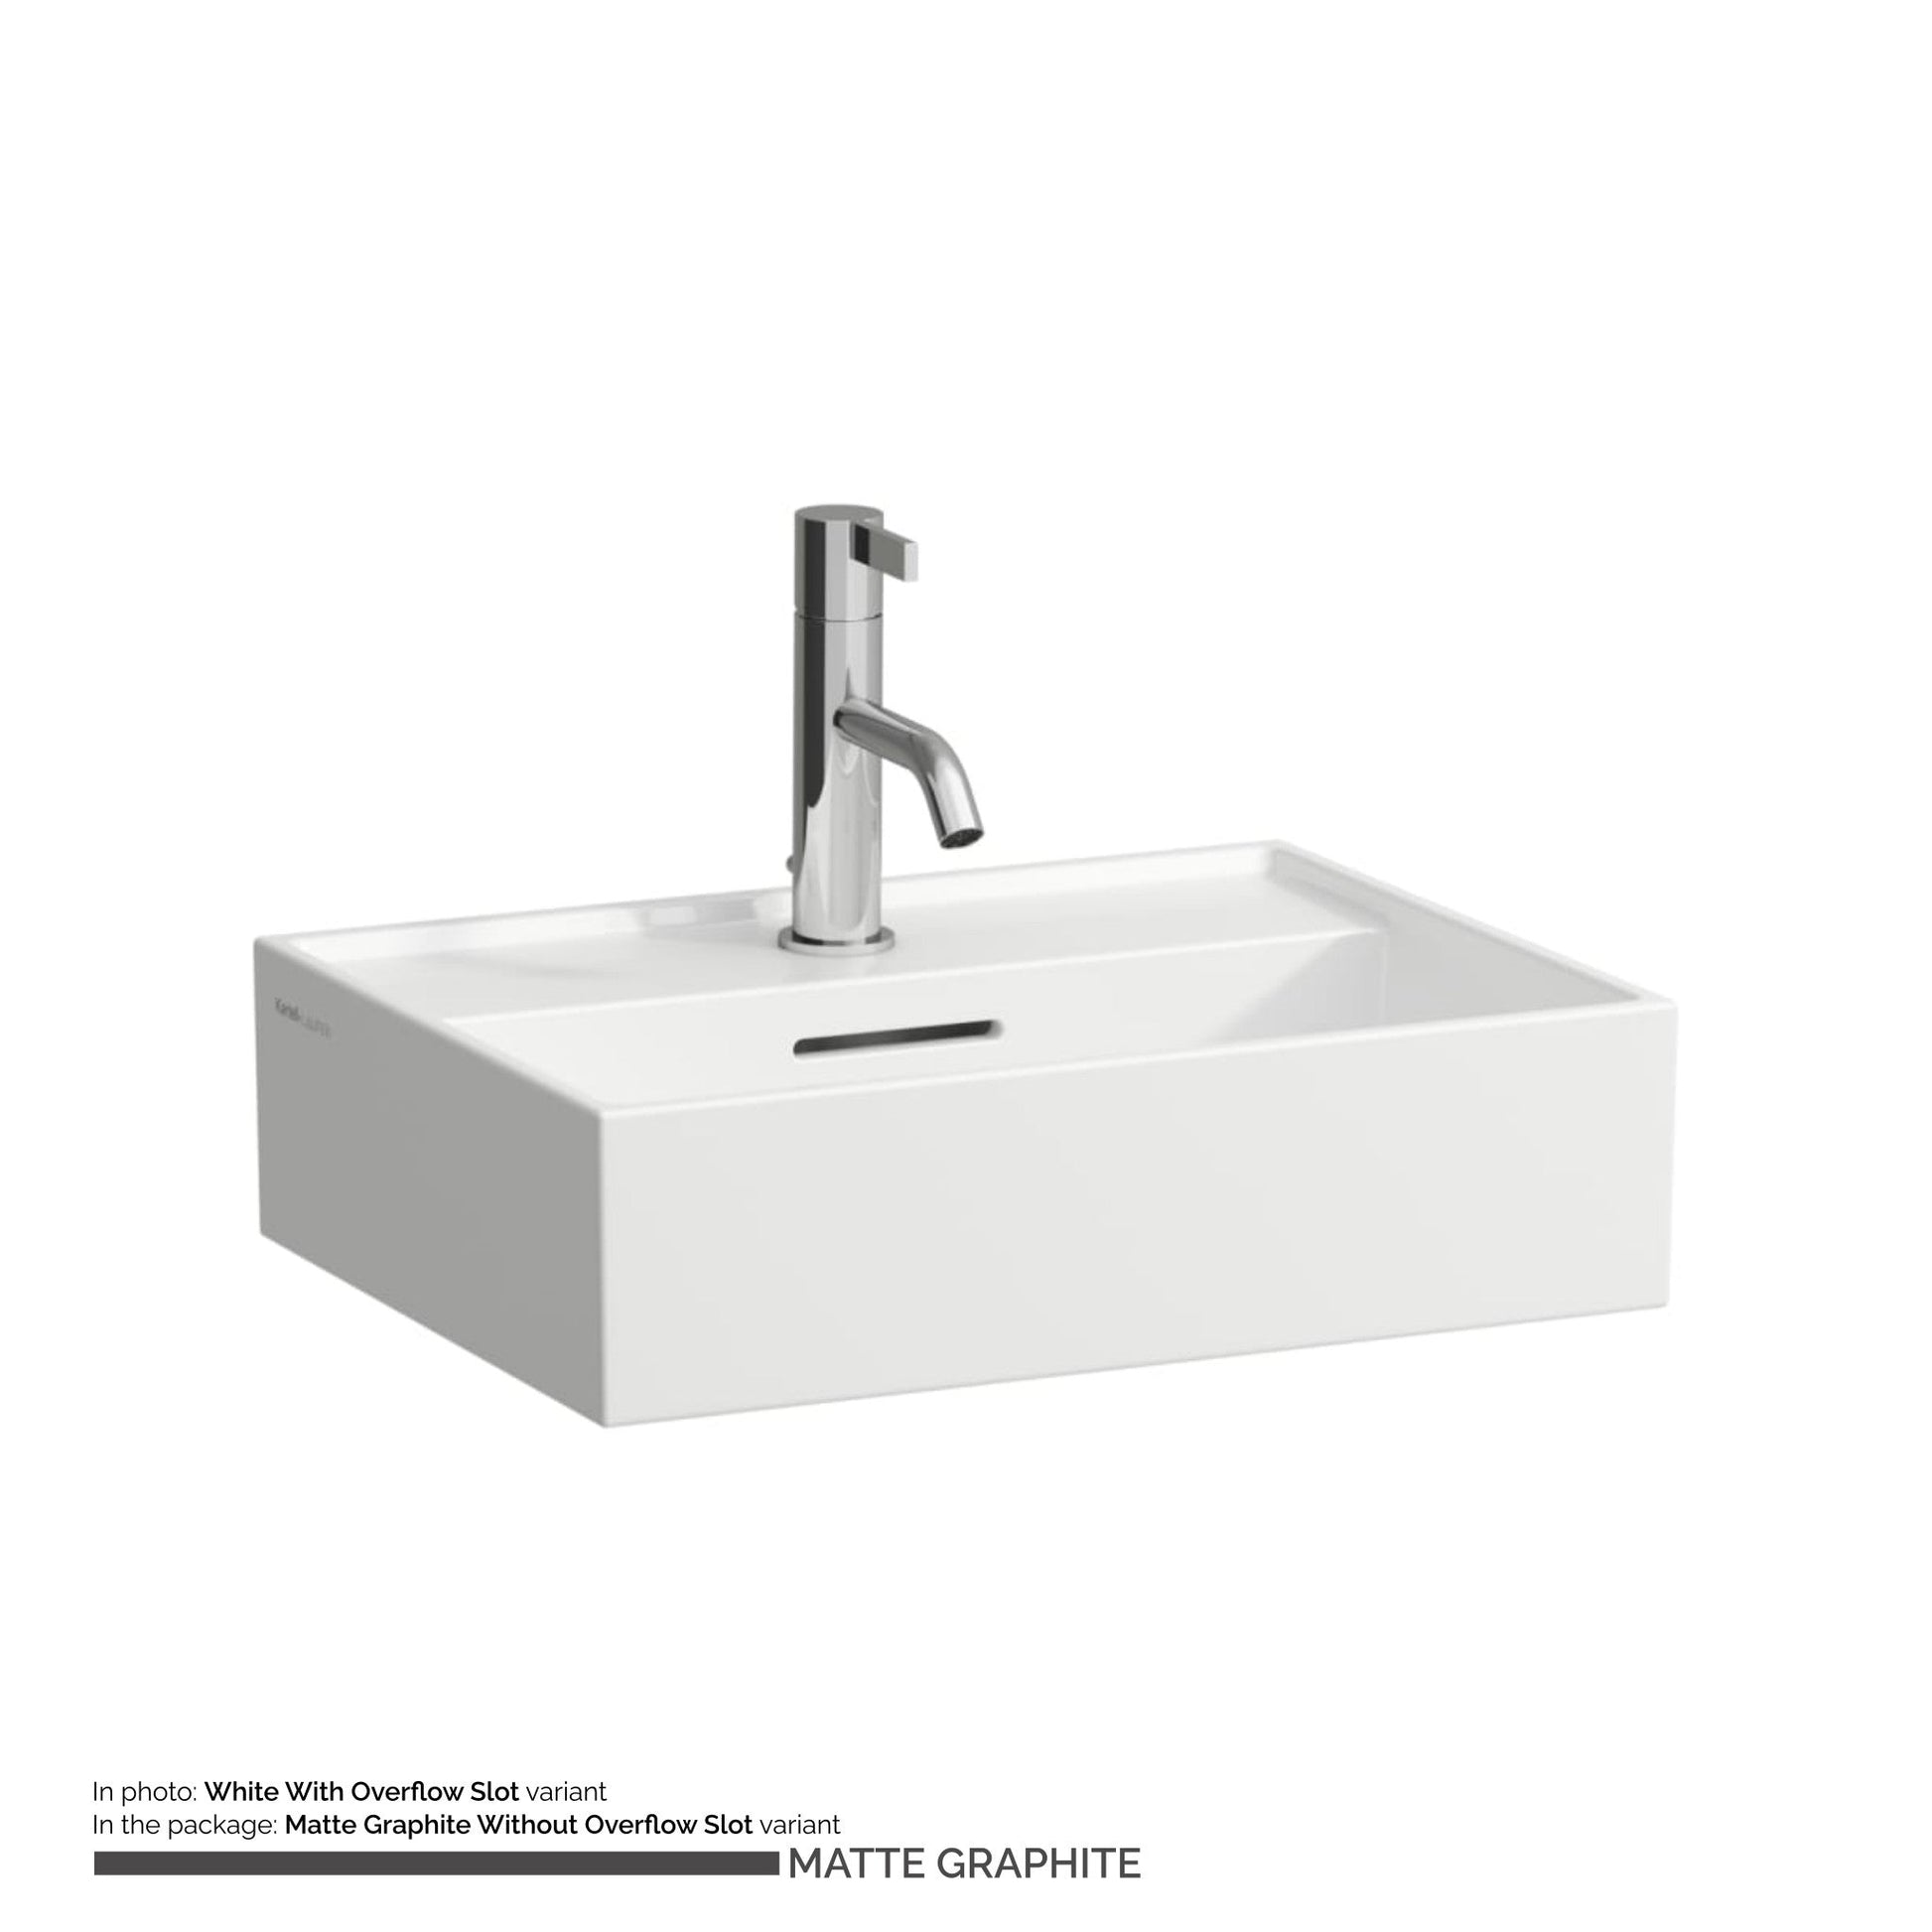 Laufen Kartell 18" x 13" Matte Graphite Wall-Mounted Bathroom Sink With Faucet Hole